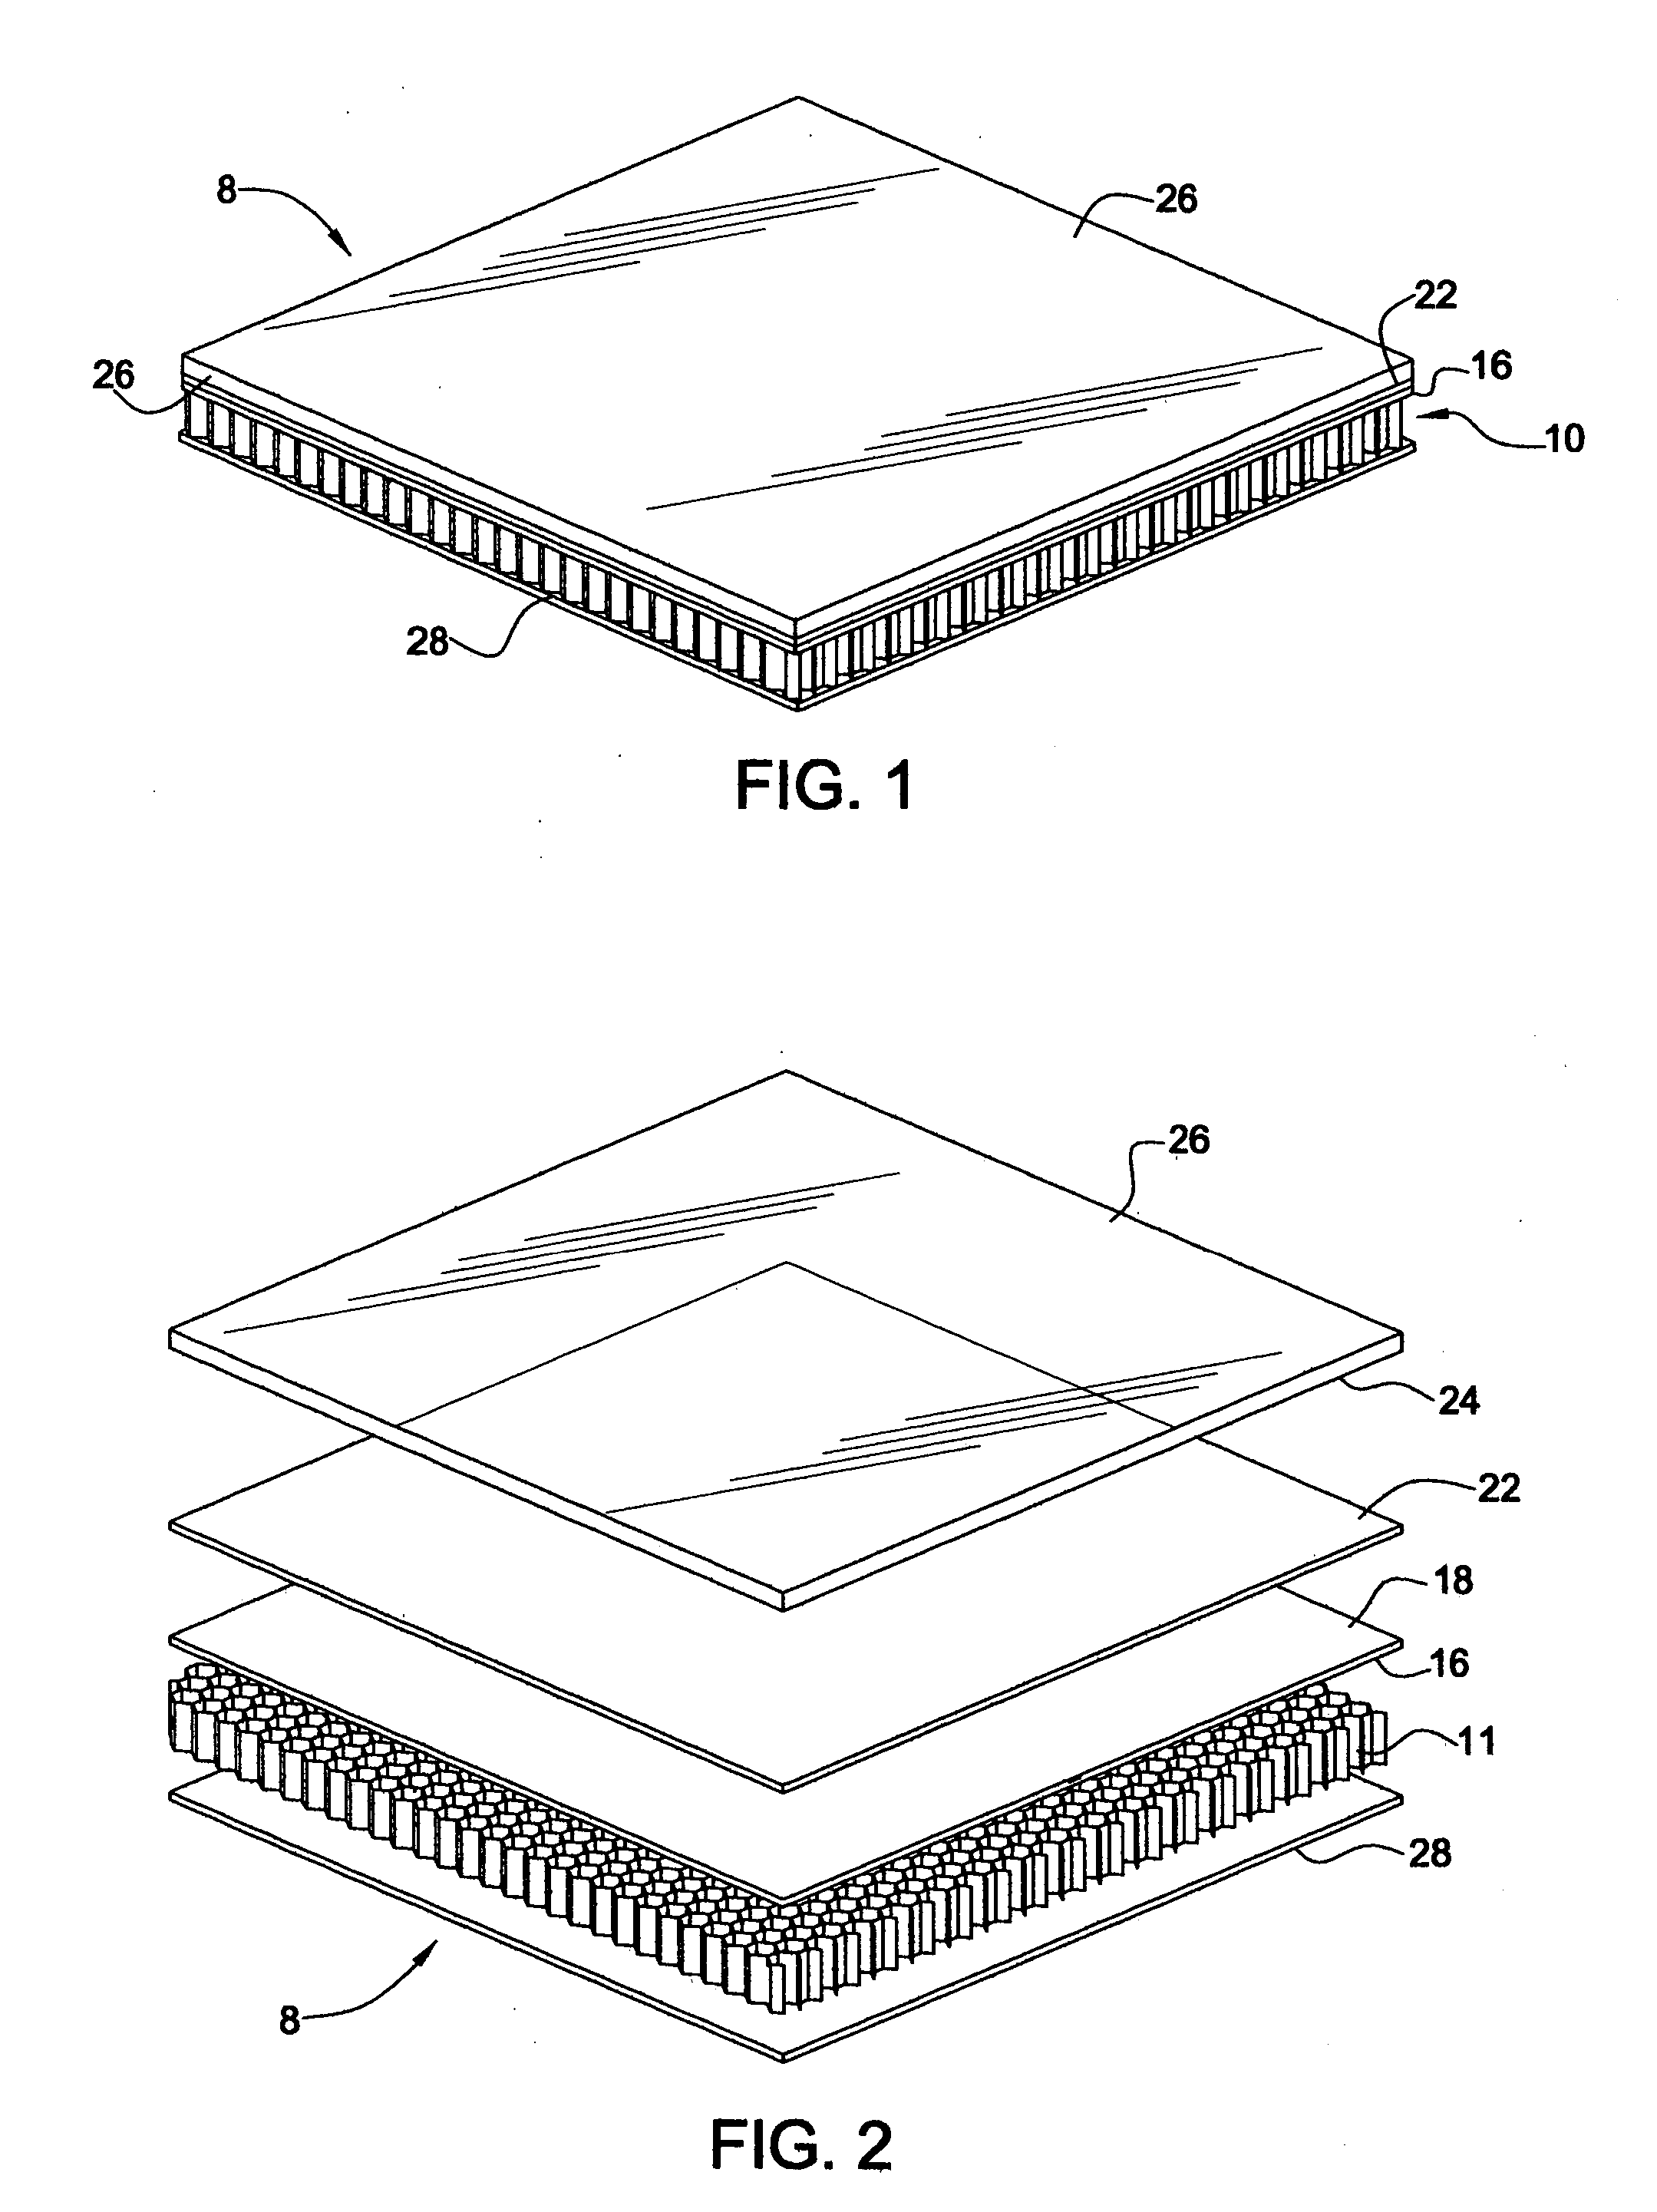 Single panel glass structural panel and method of making same